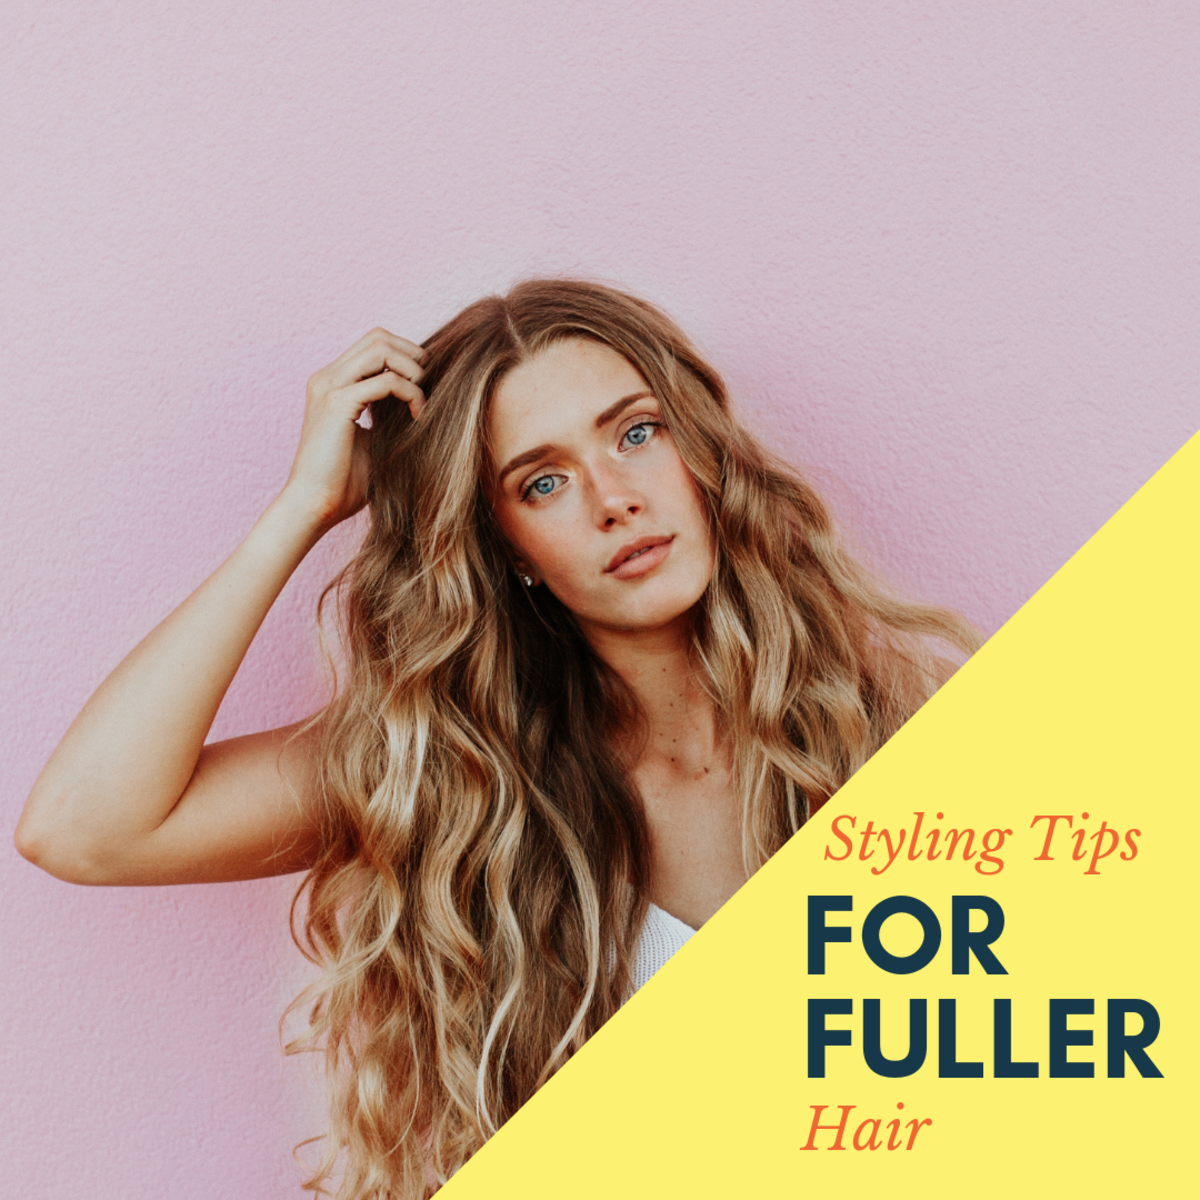 Hair-styling tips for added volume.